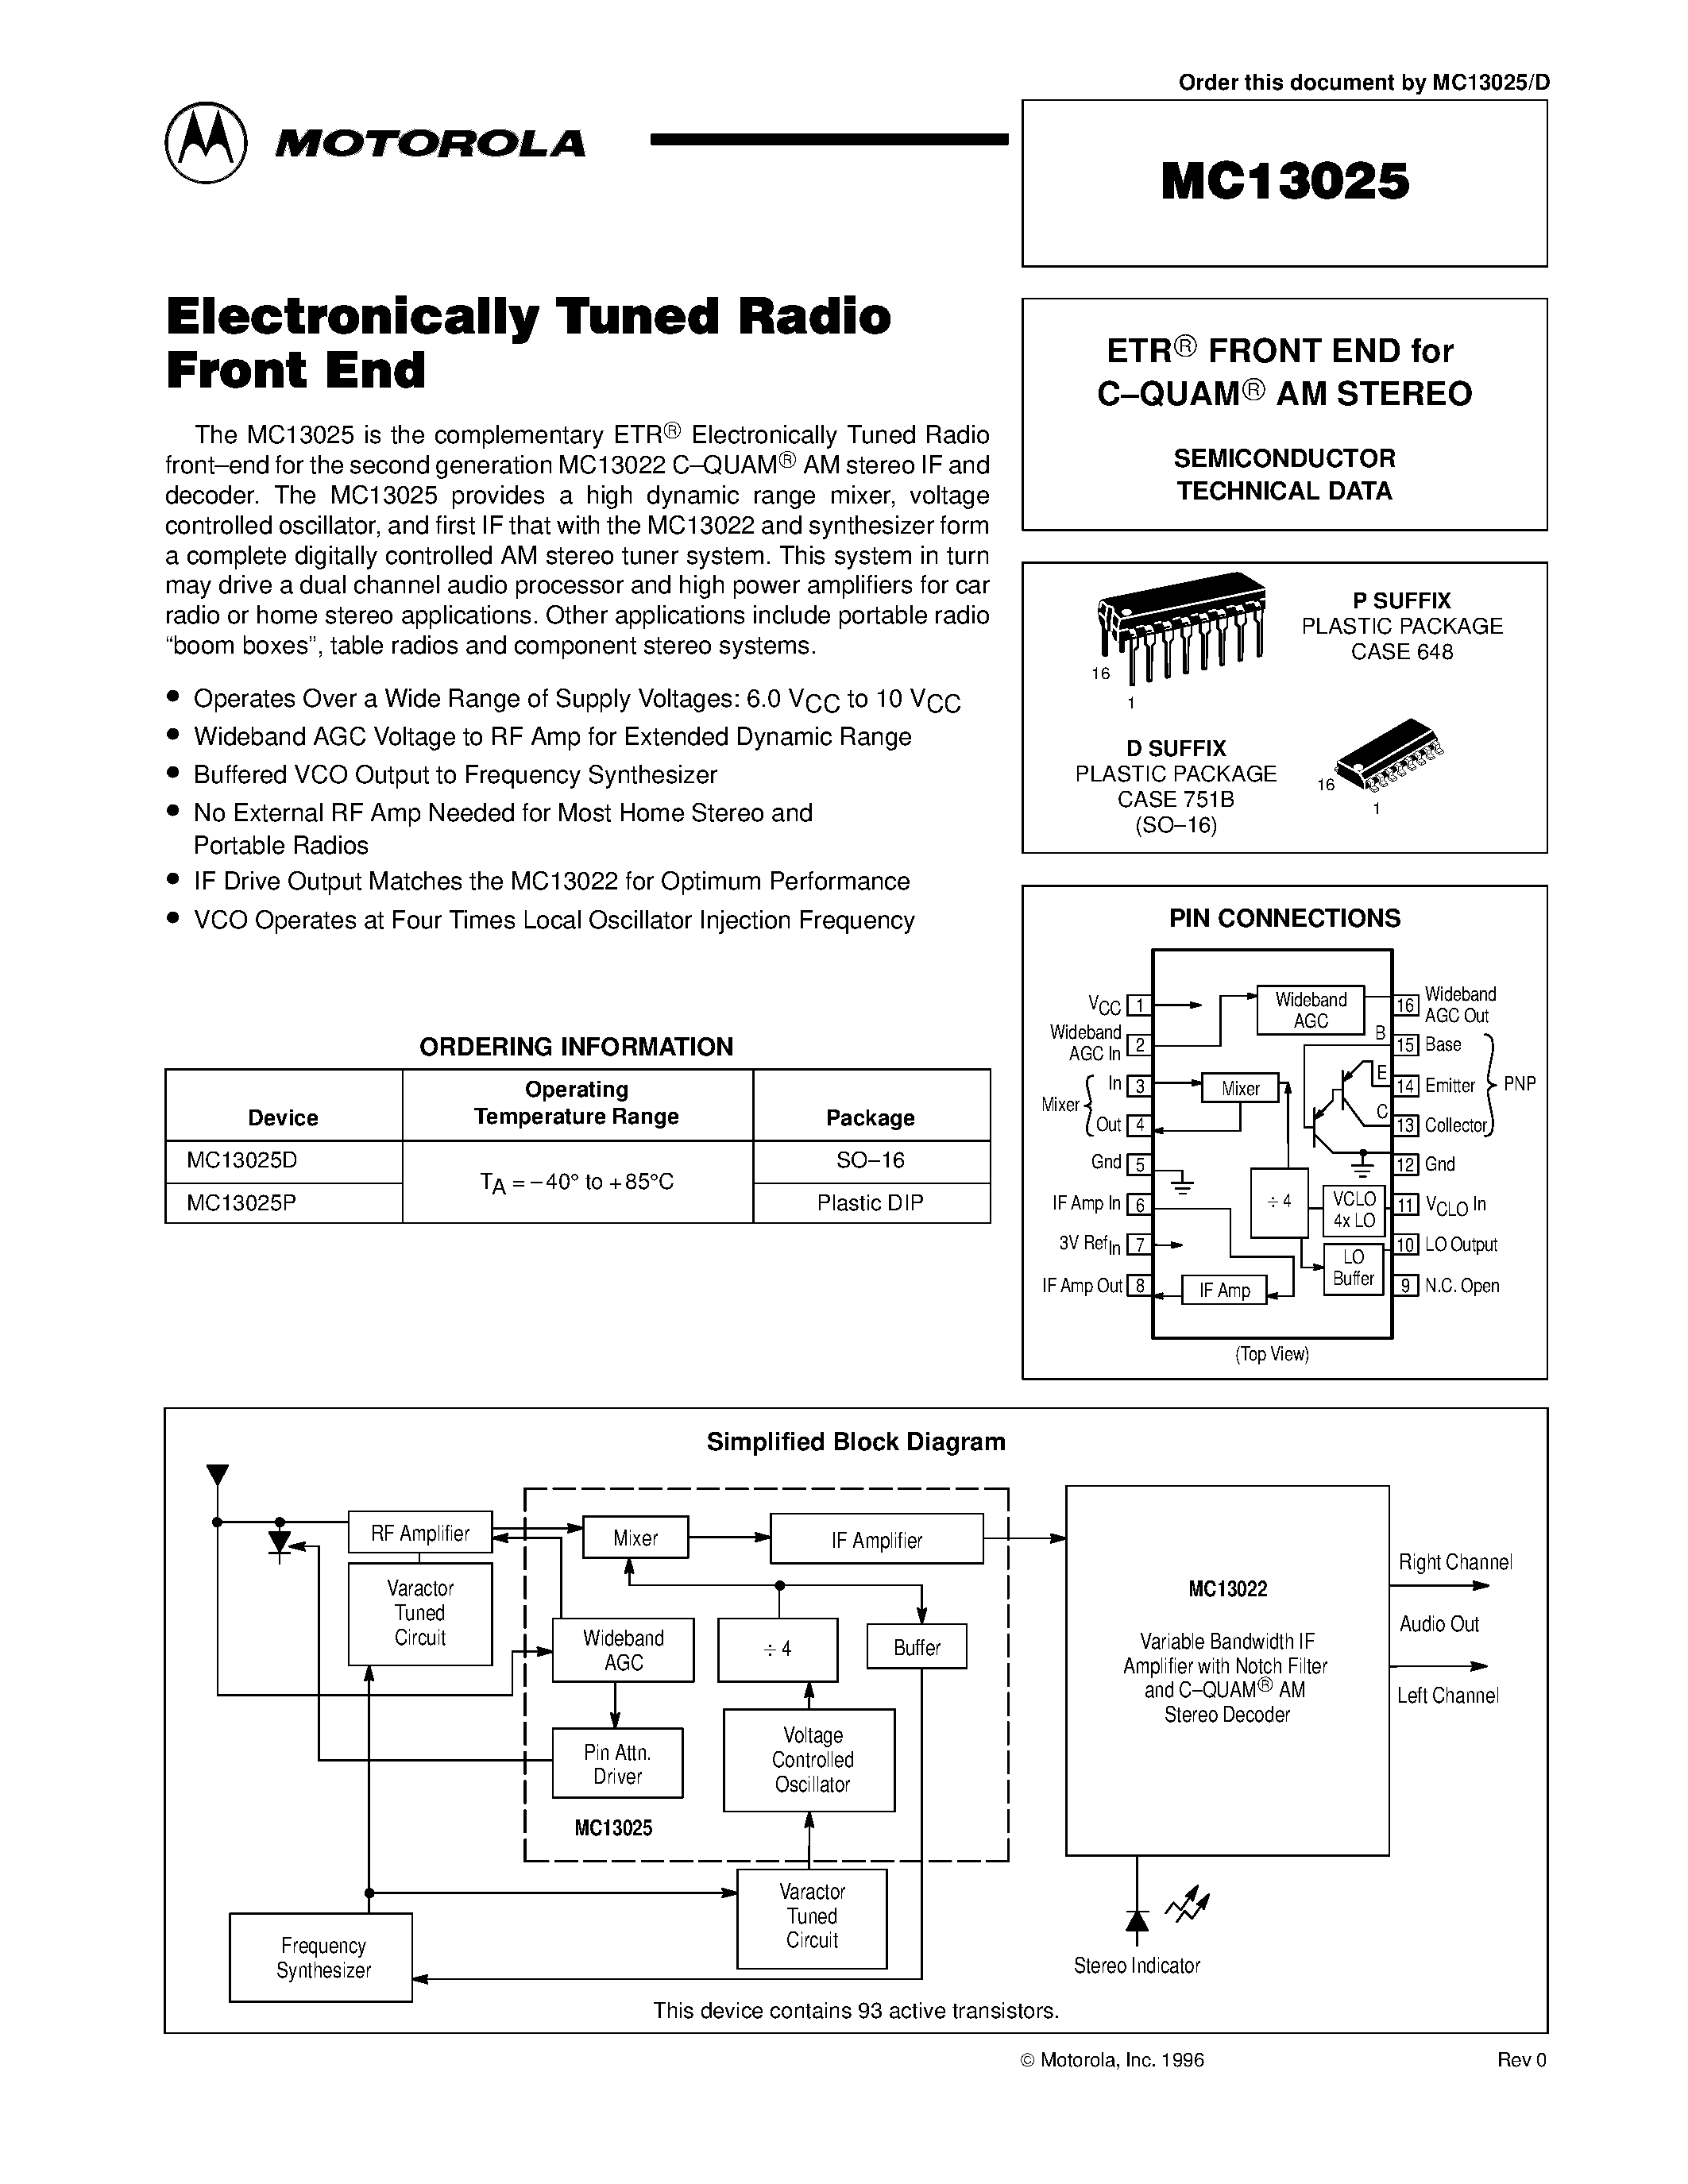 Datasheet MC13025D - Electronically Tuned Radio Front End page 1